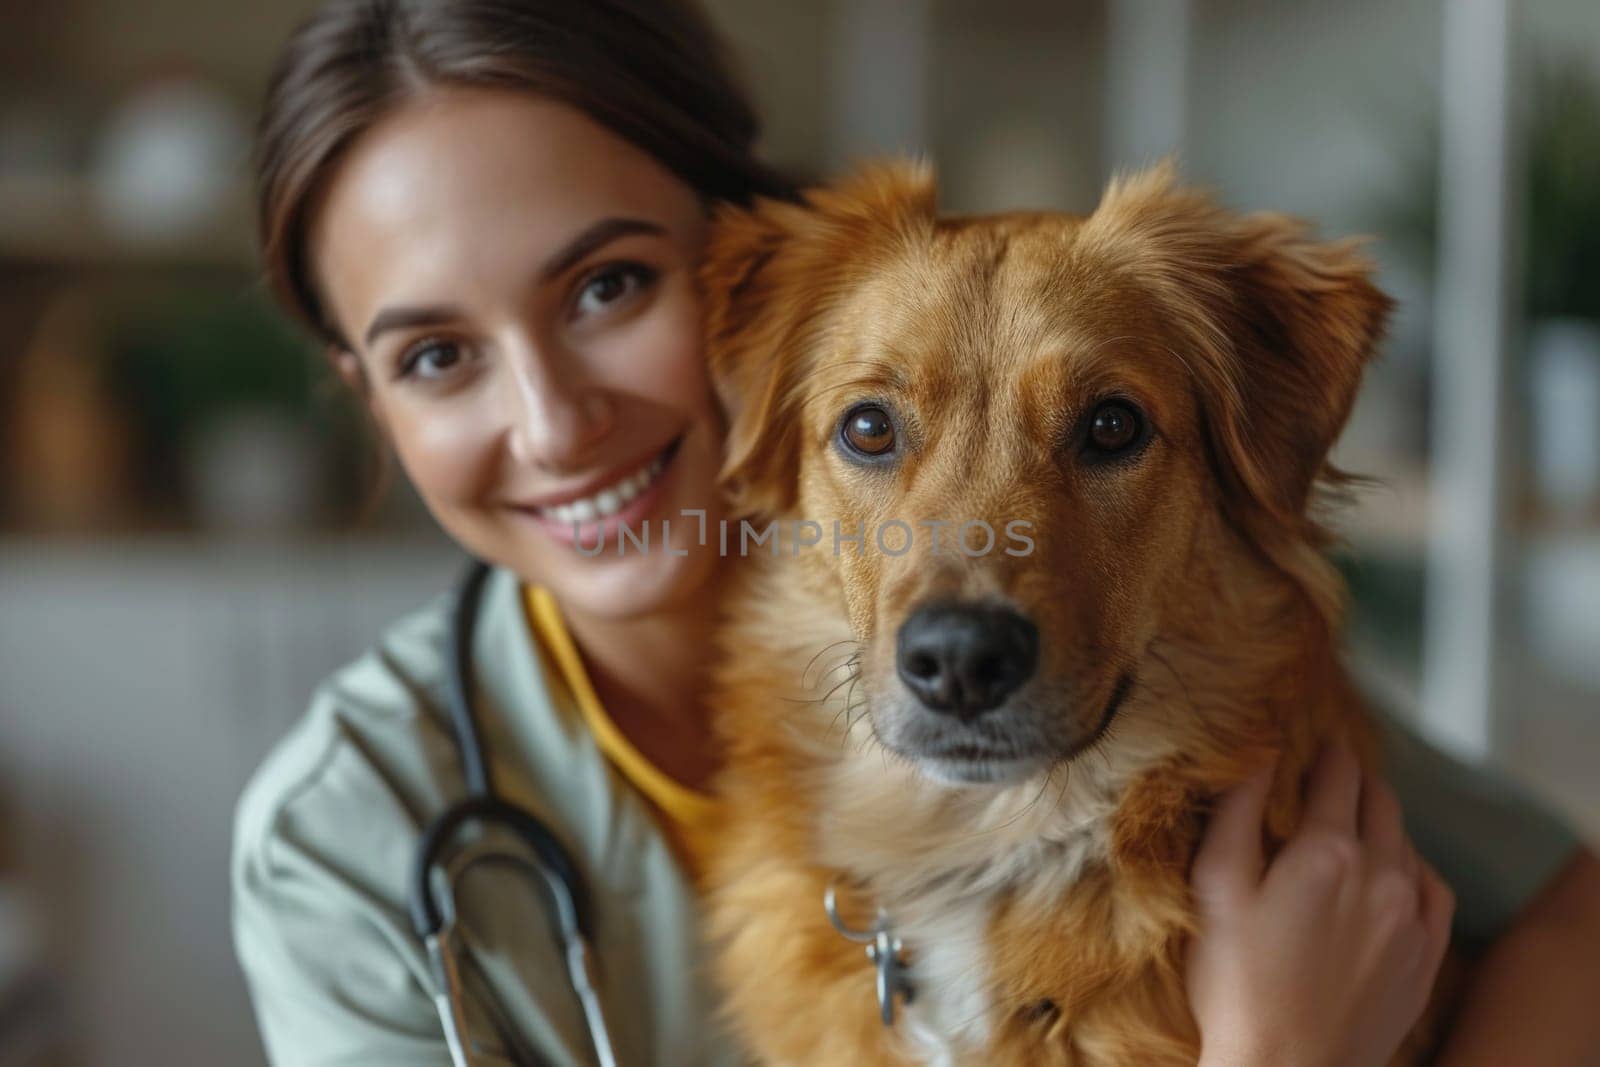 Veterinarian services at home: caring for your pet with professional attention by Yurich32